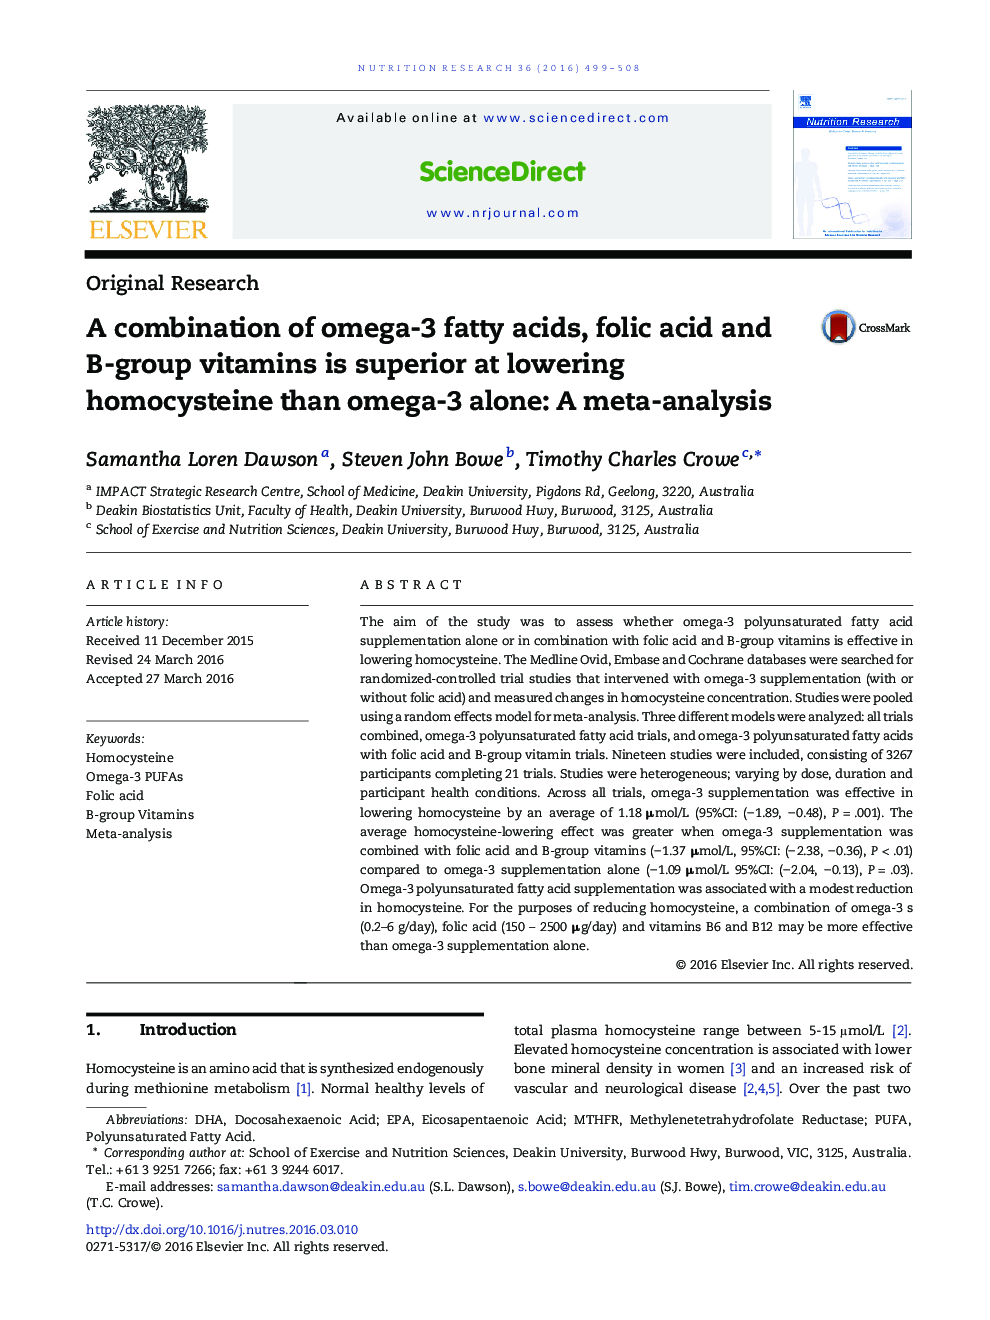 A combination of omega-3 fatty acids, folic acid and B-group vitamins is superior at lowering homocysteine than omega-3 alone: A meta-analysis